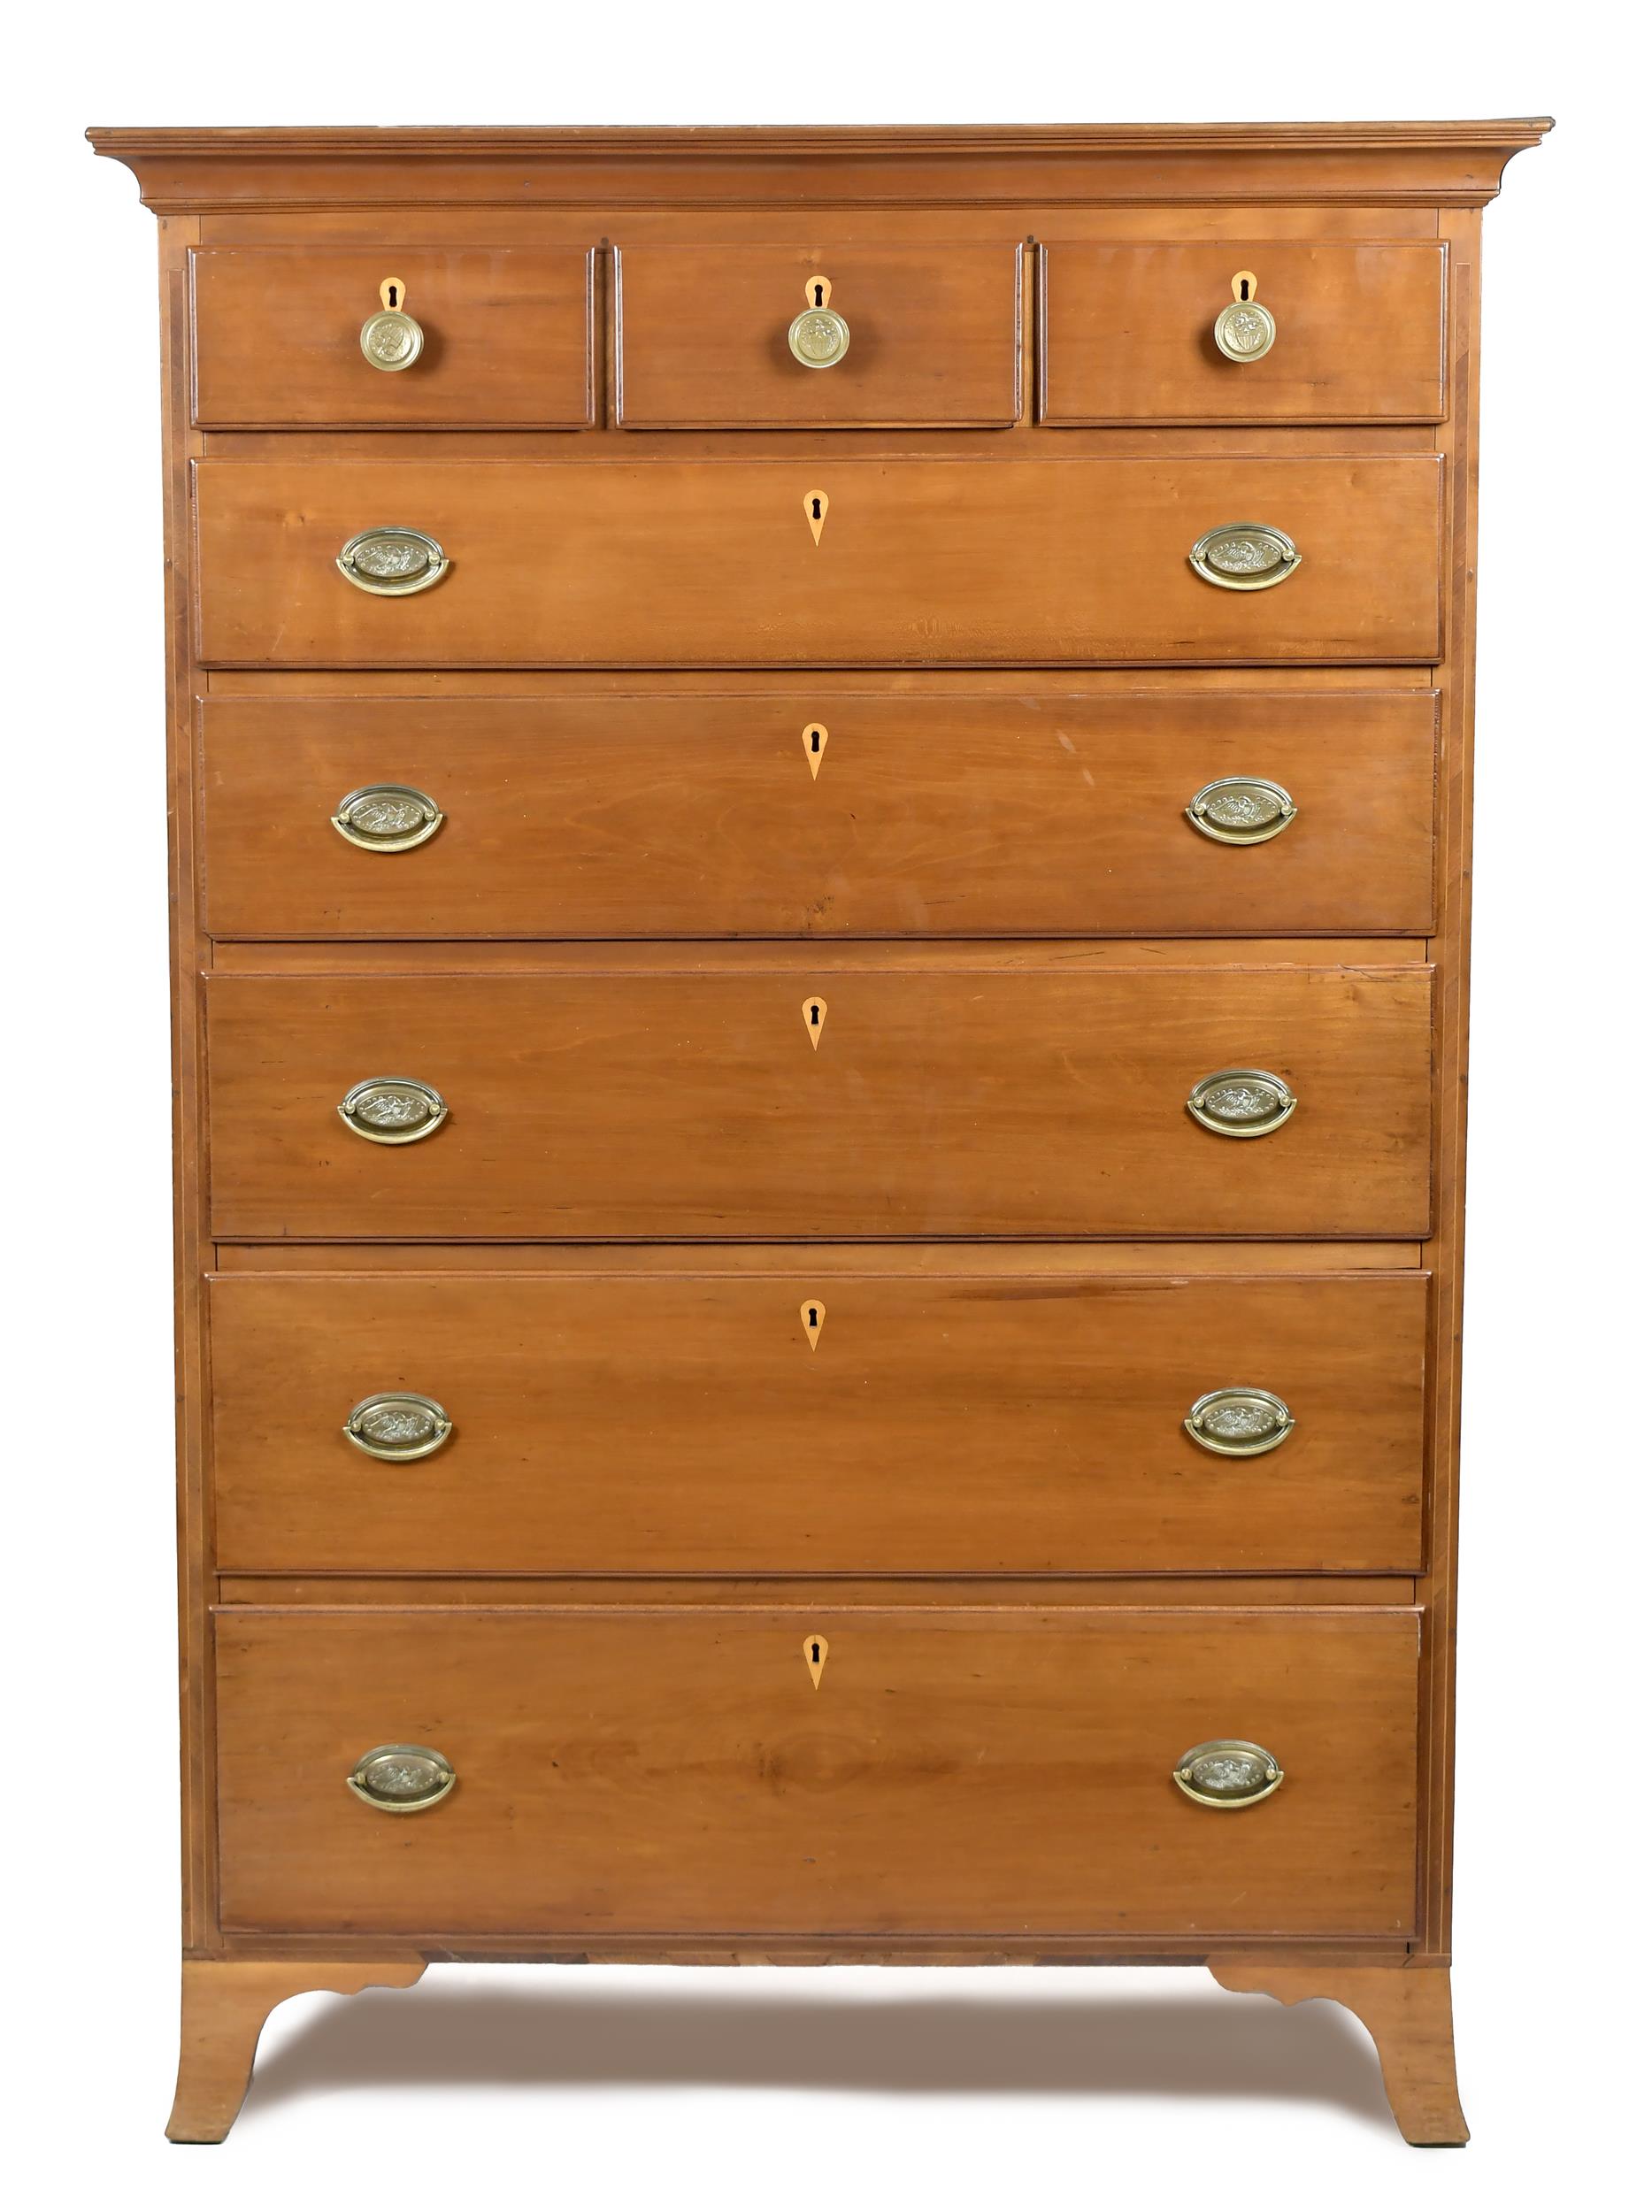 FEDERAL CHERRY INLAID TALL CHEST 3ab056